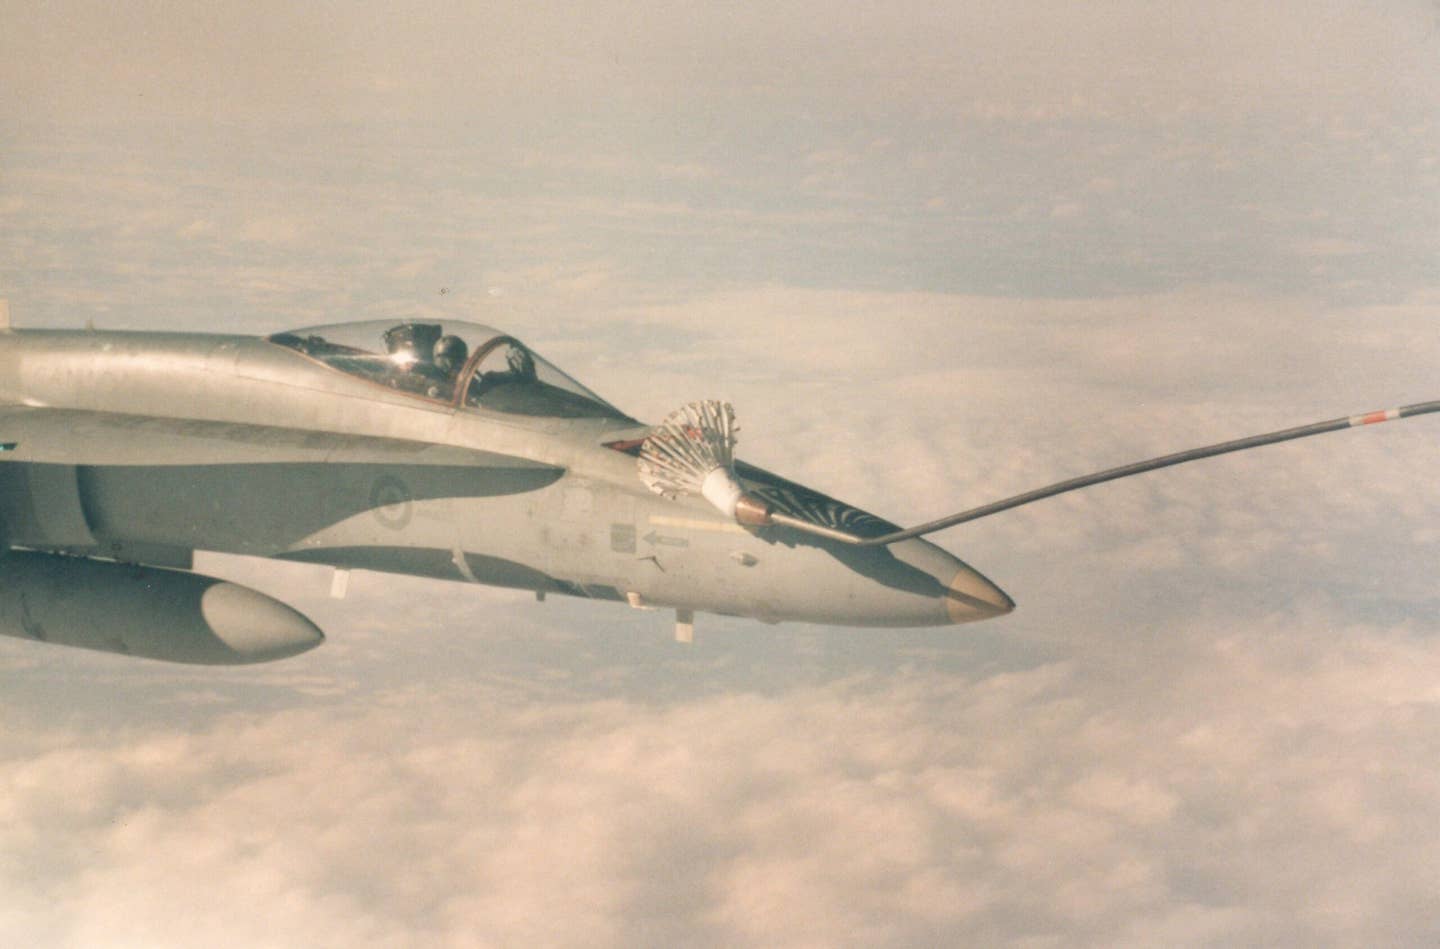 A 'tip-off' in a Hornet. Notice how the probe has hit the basket off-center, causing it to bend. In a moment, the 300-lb basket is likely to hit the Hornet. No, that’s not me – I took the picture from a 707 tanker window. <em>Dan McWilliams</em>